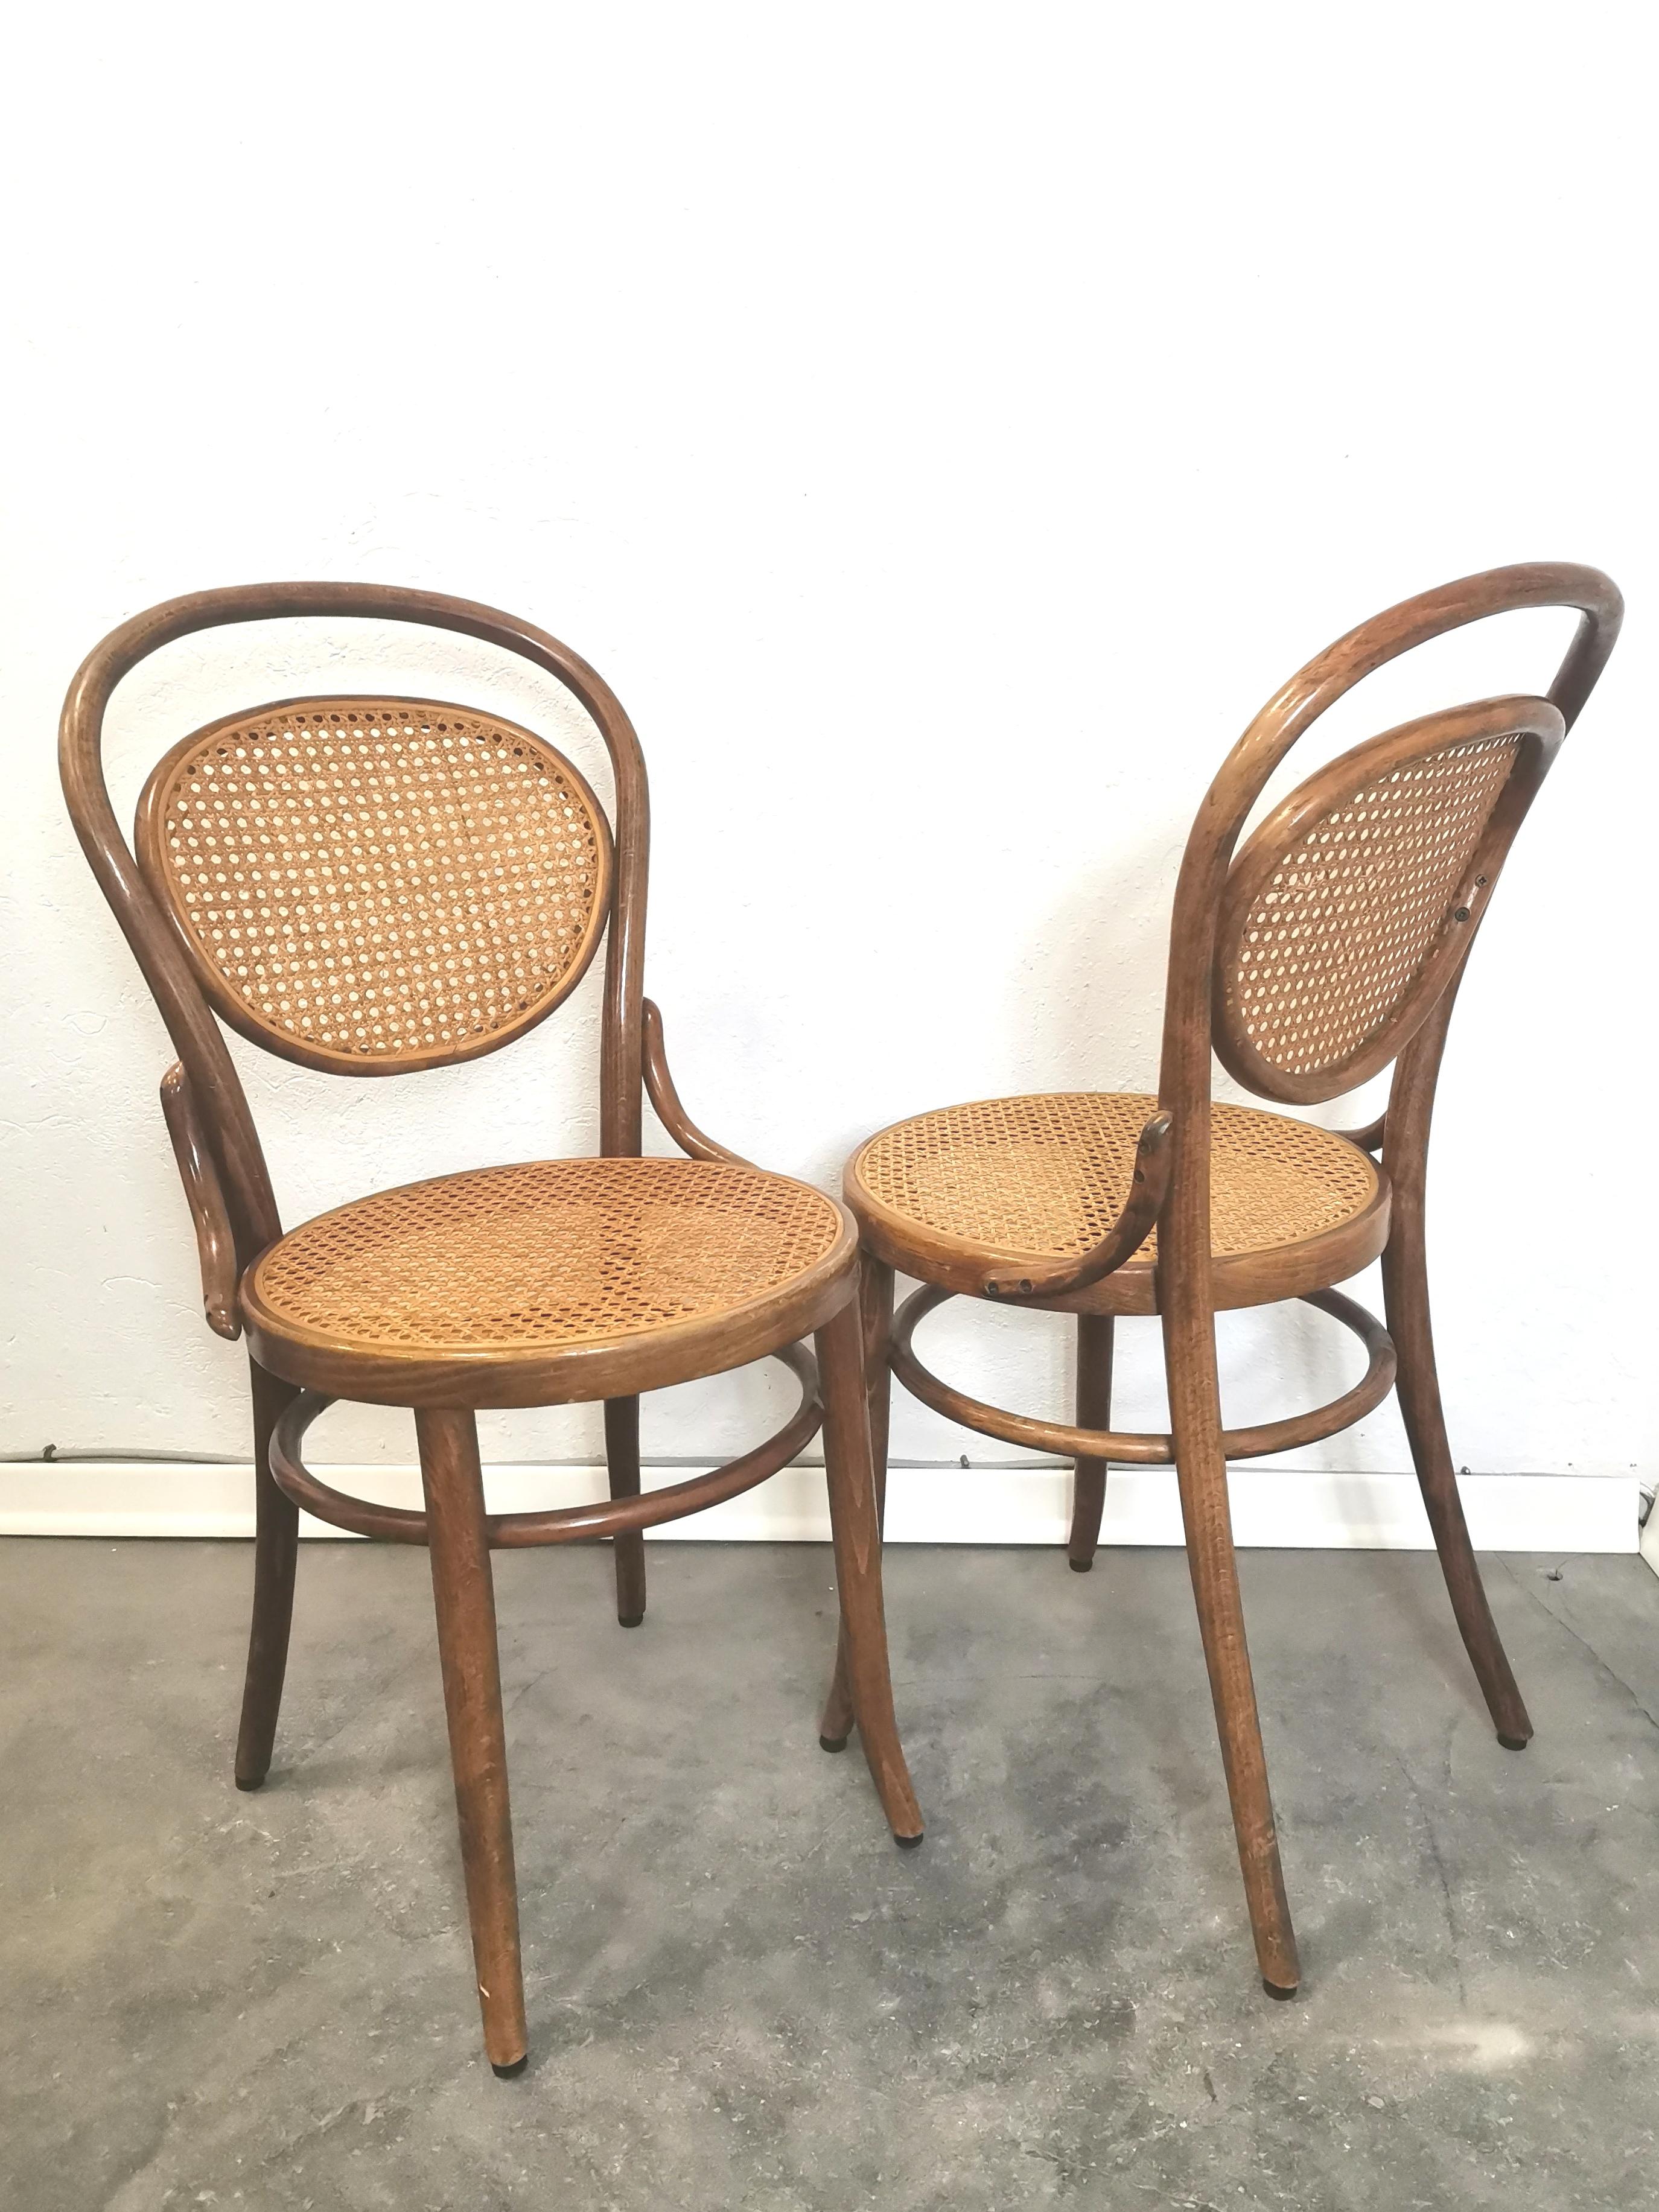 Thonet Chair N. 215, 1960s, 1 of 4 For Sale 2